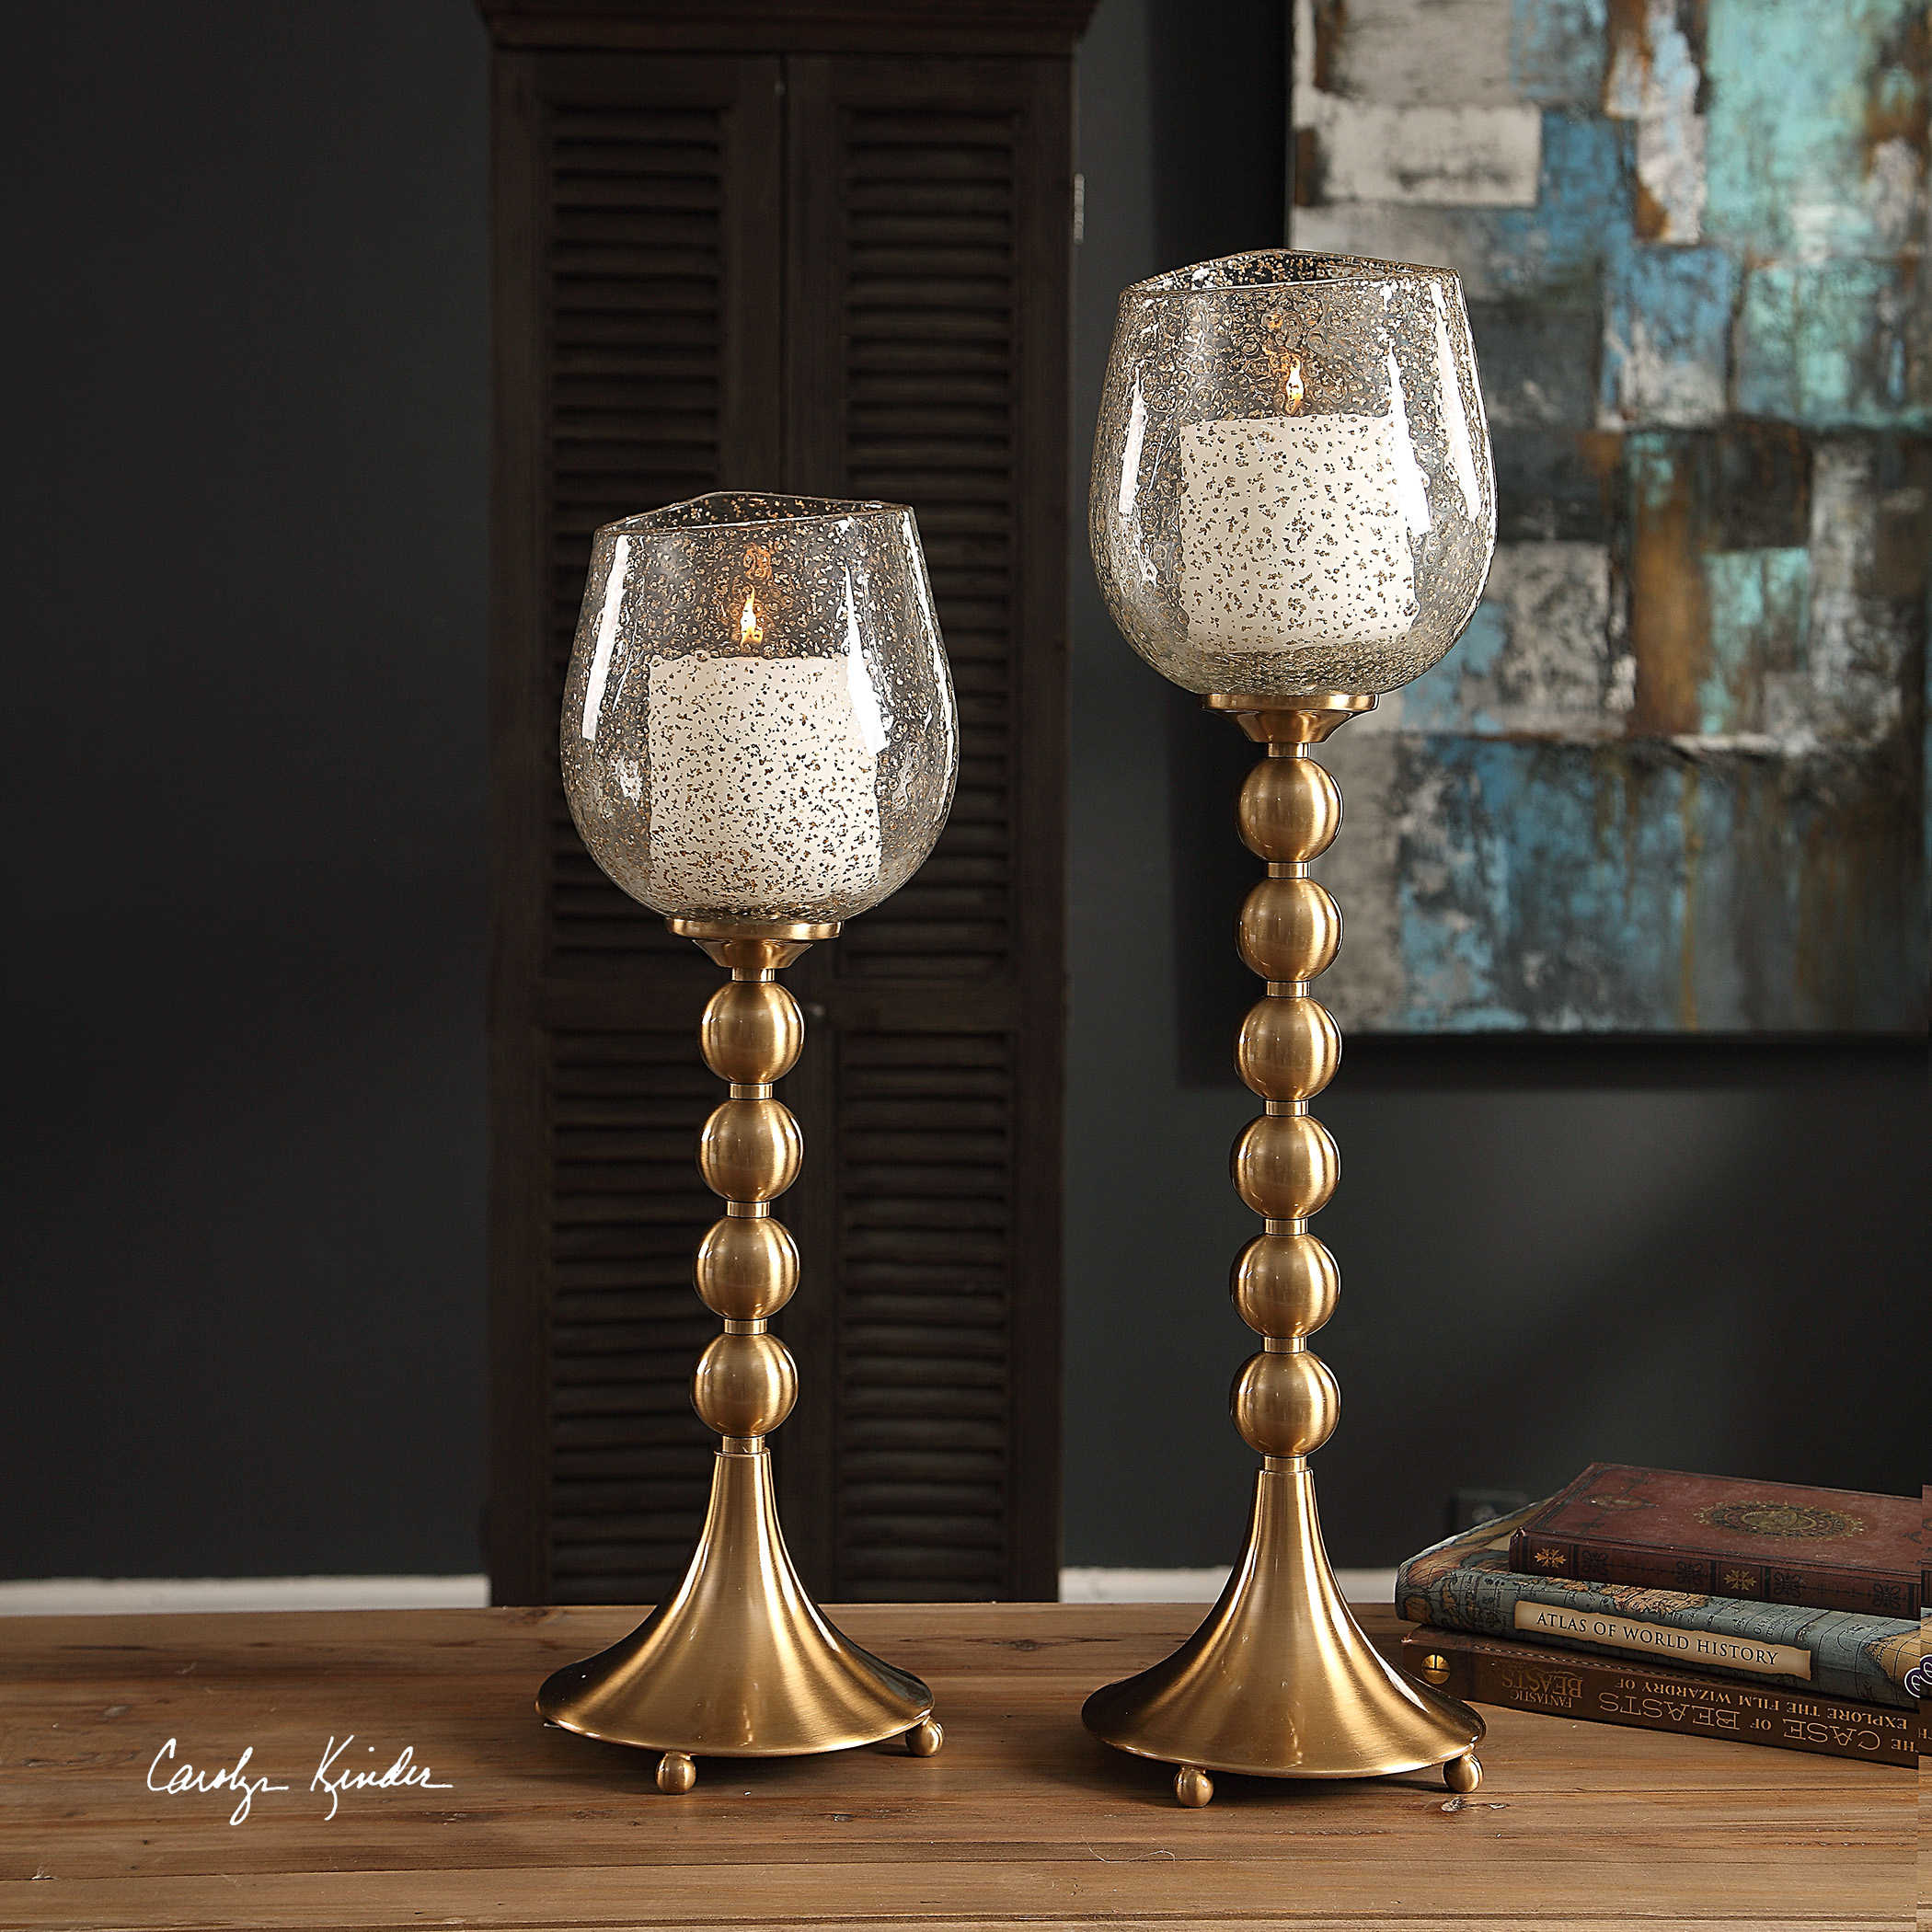 glass globes for candles